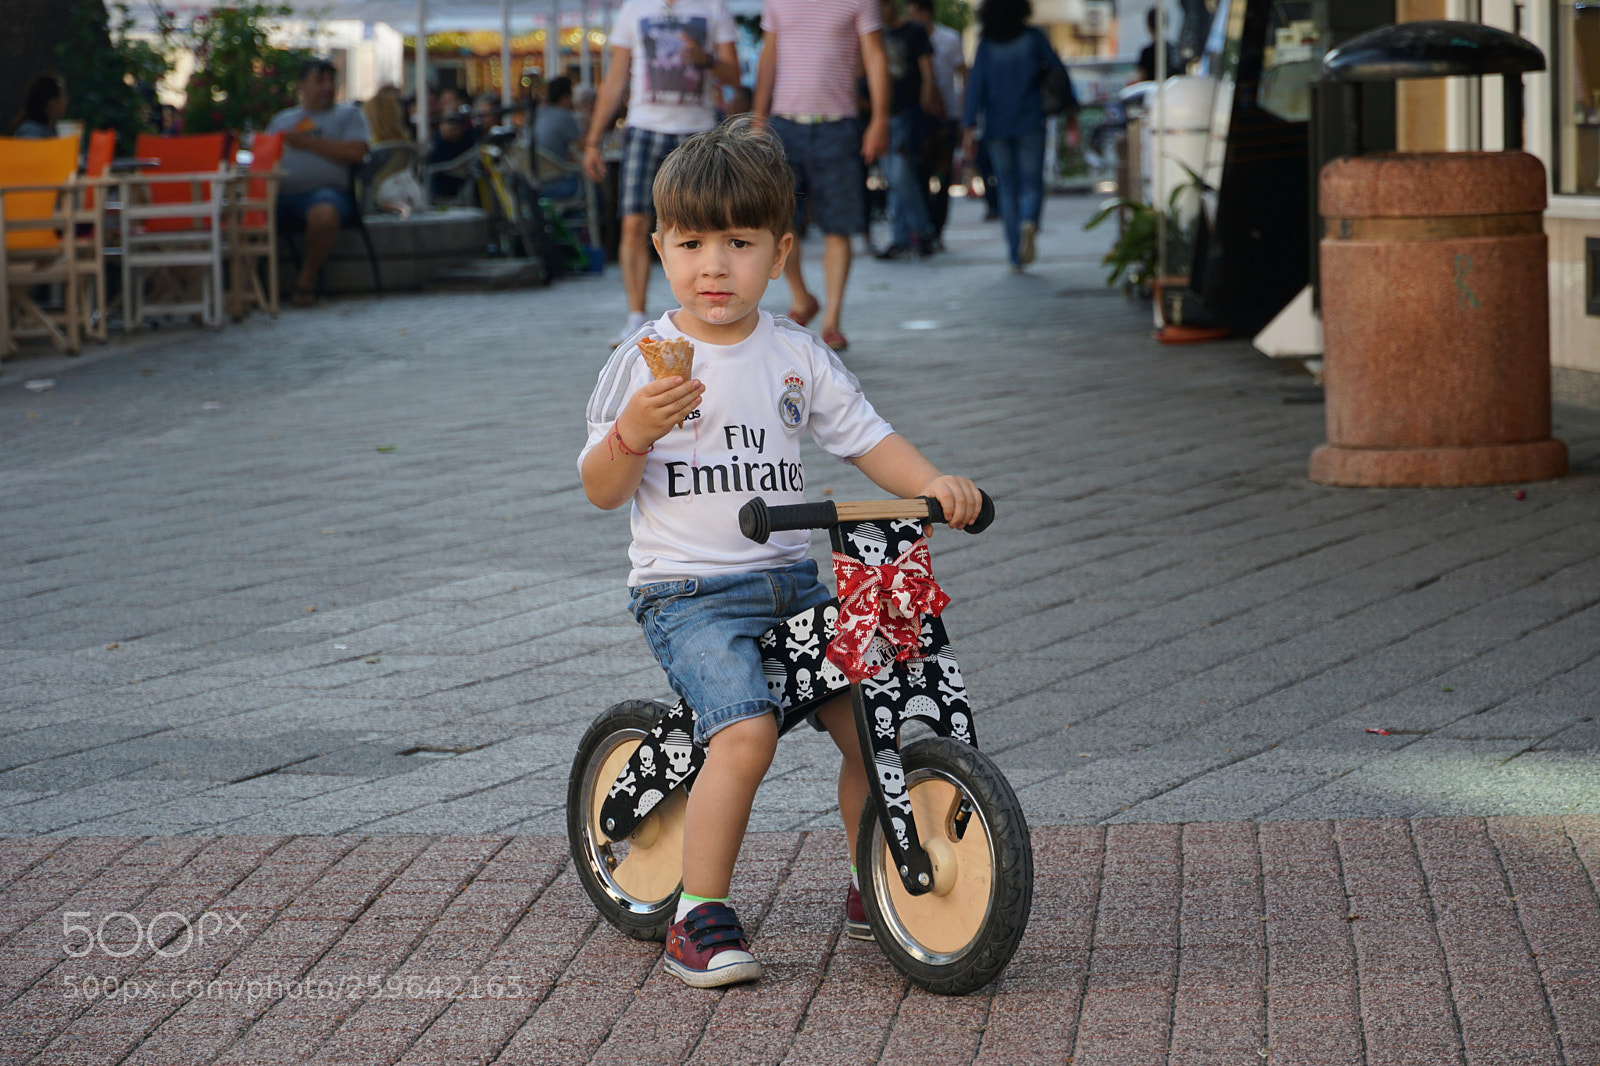 Sony a6300 sample photo. People of plovdiv, bulgaria. photography